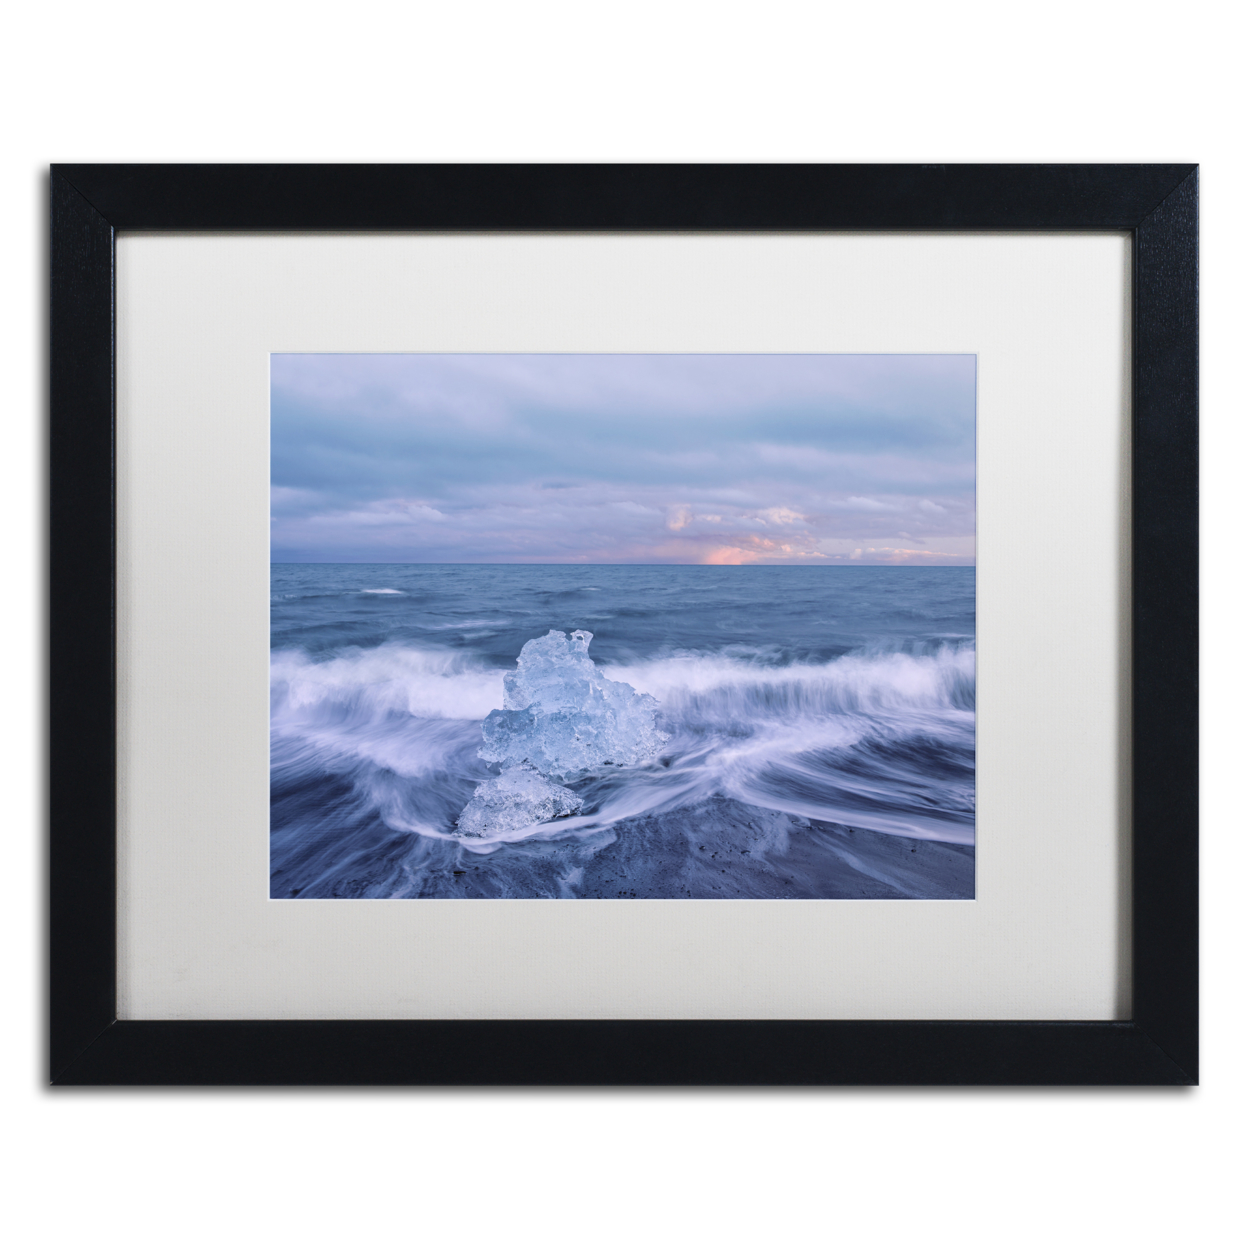 Michael Blanchette Photography 'Diamond In The Surf' Black Wooden Framed Art 18 X 22 Inches